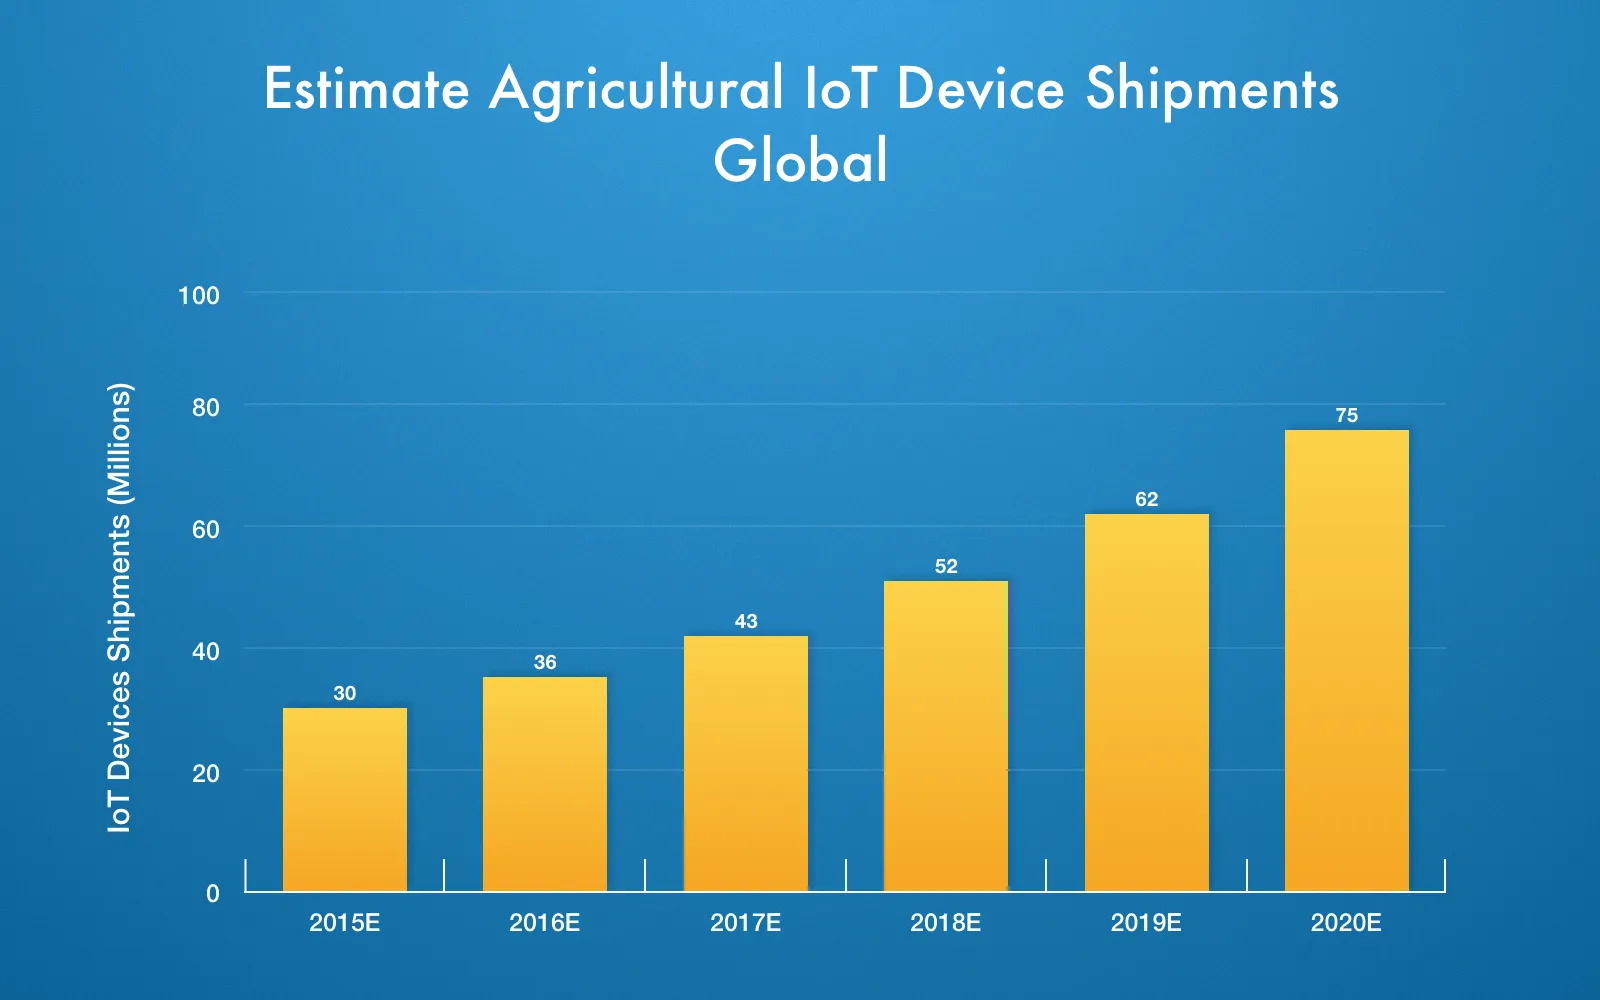 Smart agriculture market size can be measured by the number of agricultural IoT devices shipped worldwide